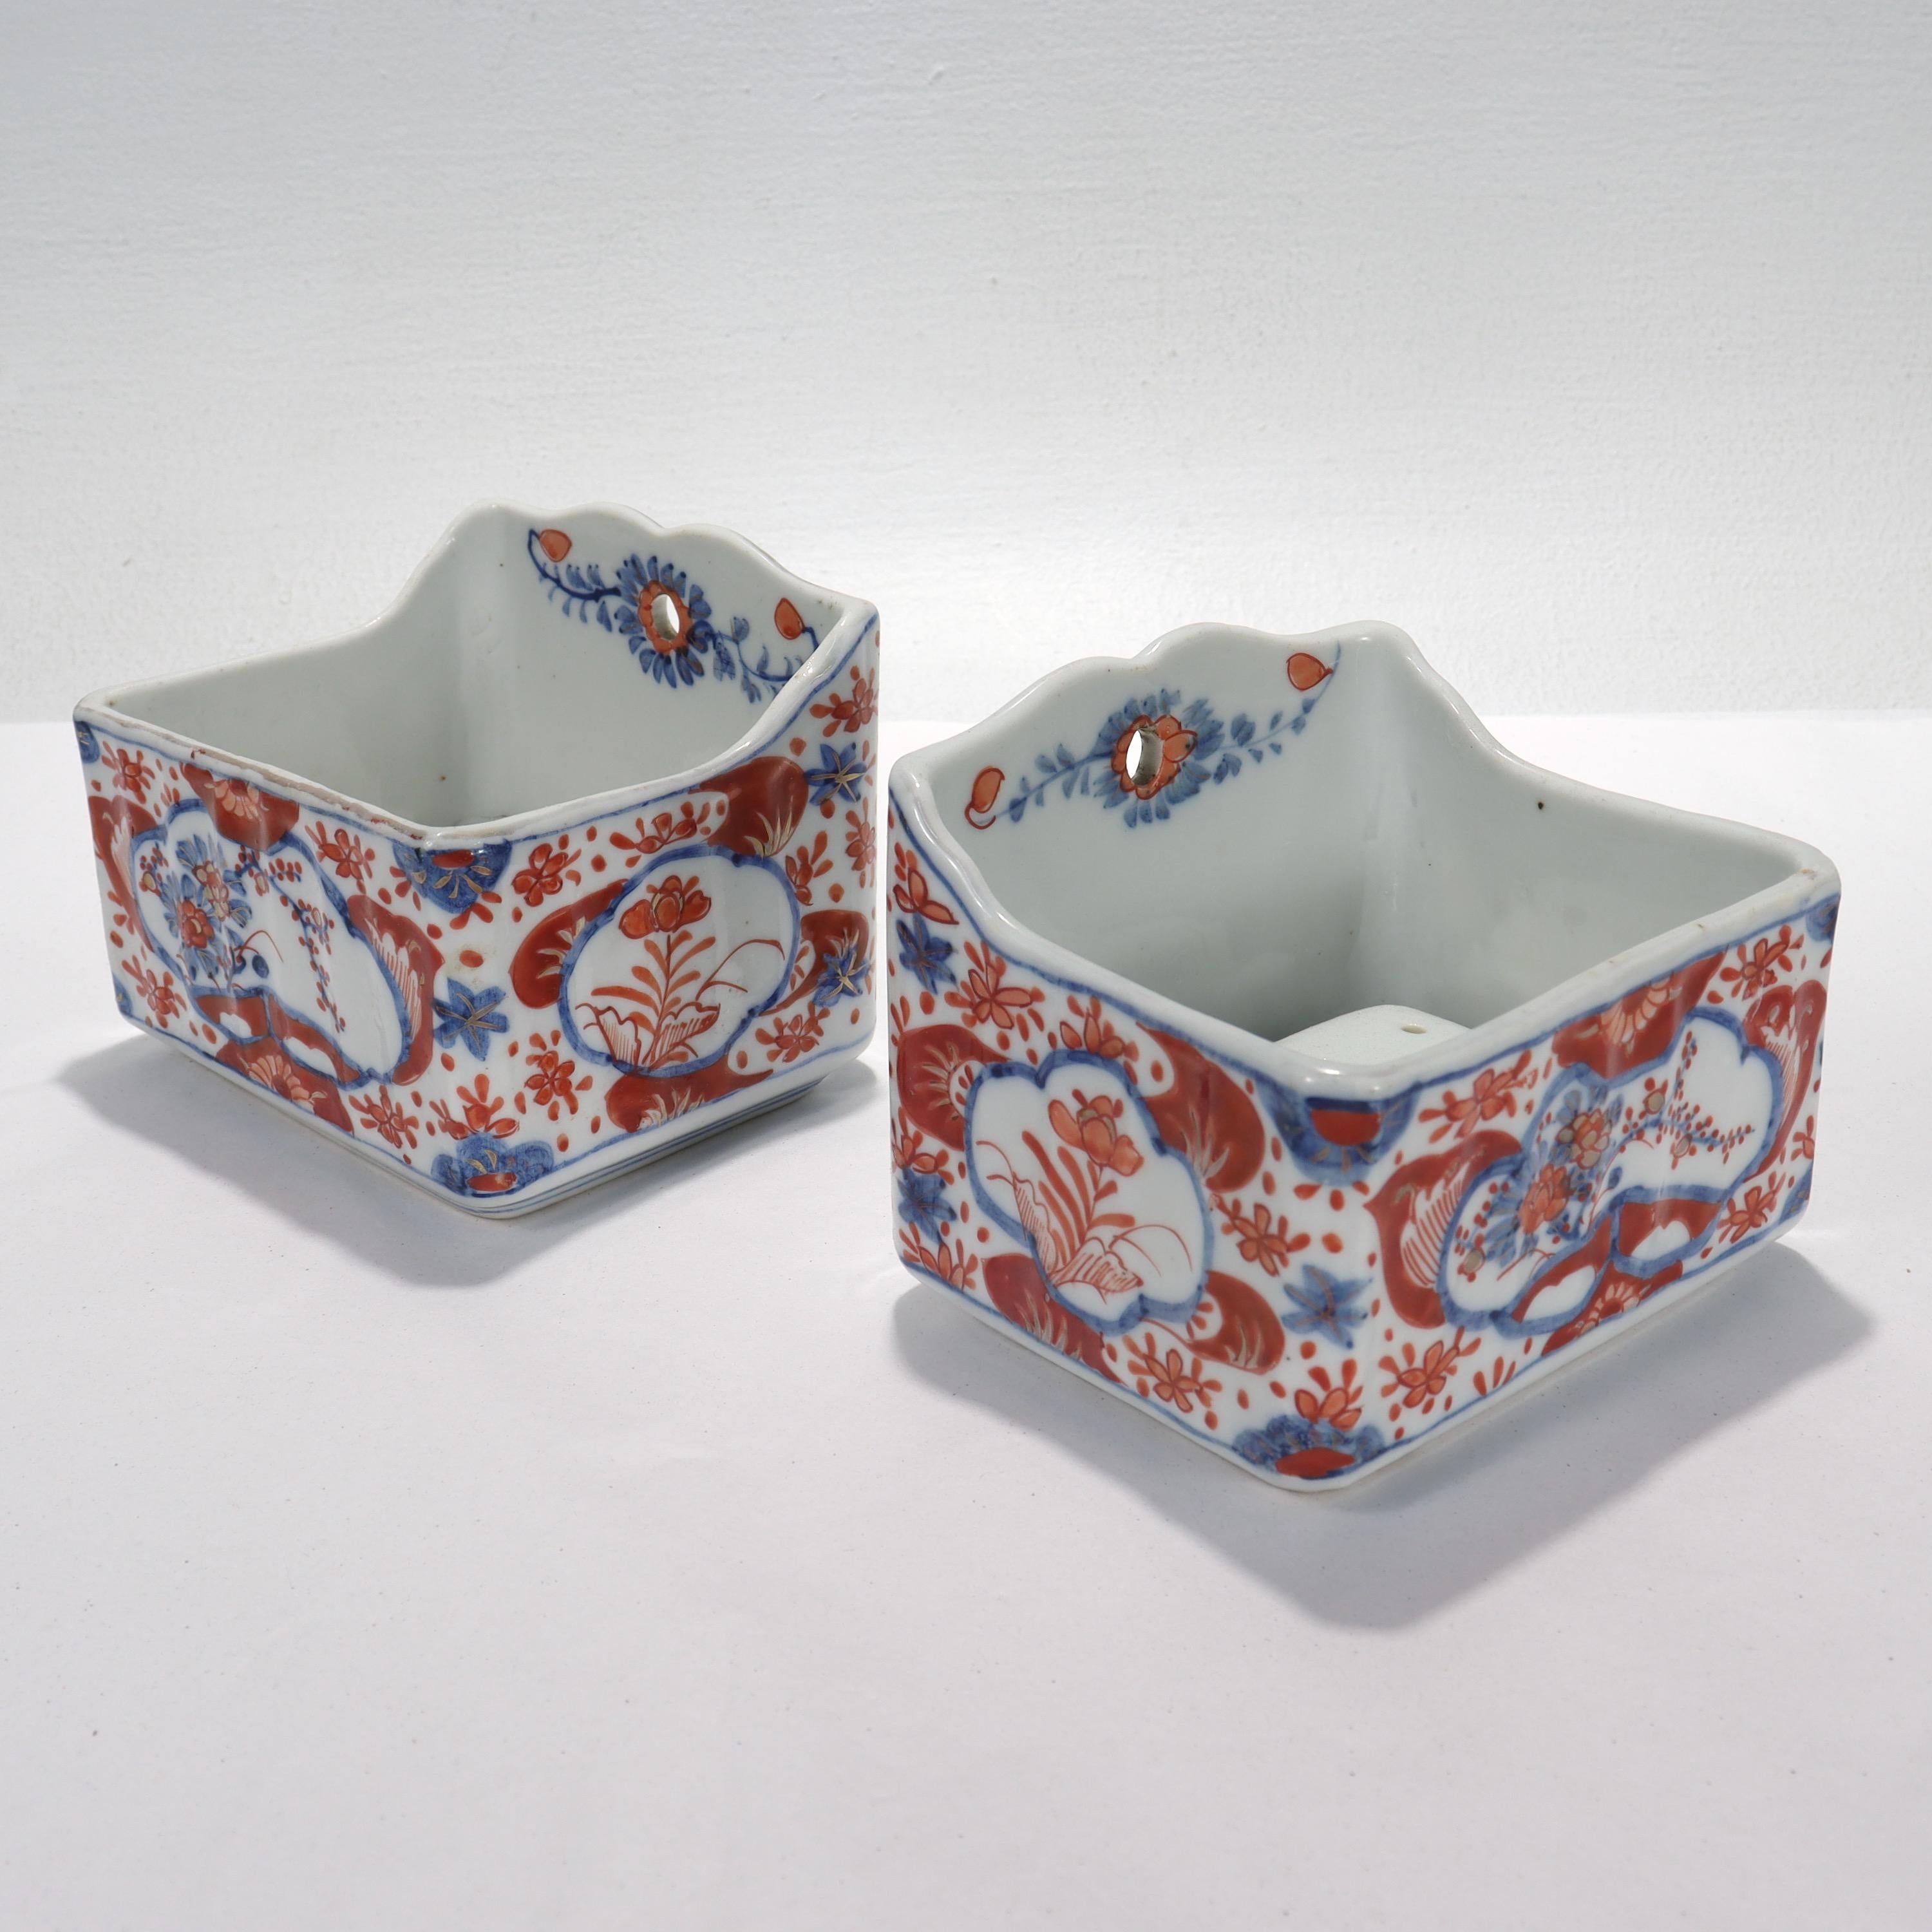 A pair of fine antique Japanese Imari porcelain soap dishes

Decorated throughout with floral devices in underglaze blue, iron-red paint, and gilding.

Each with a strainer inside the dish.

Simply a great pair of Japanese porcelain soap